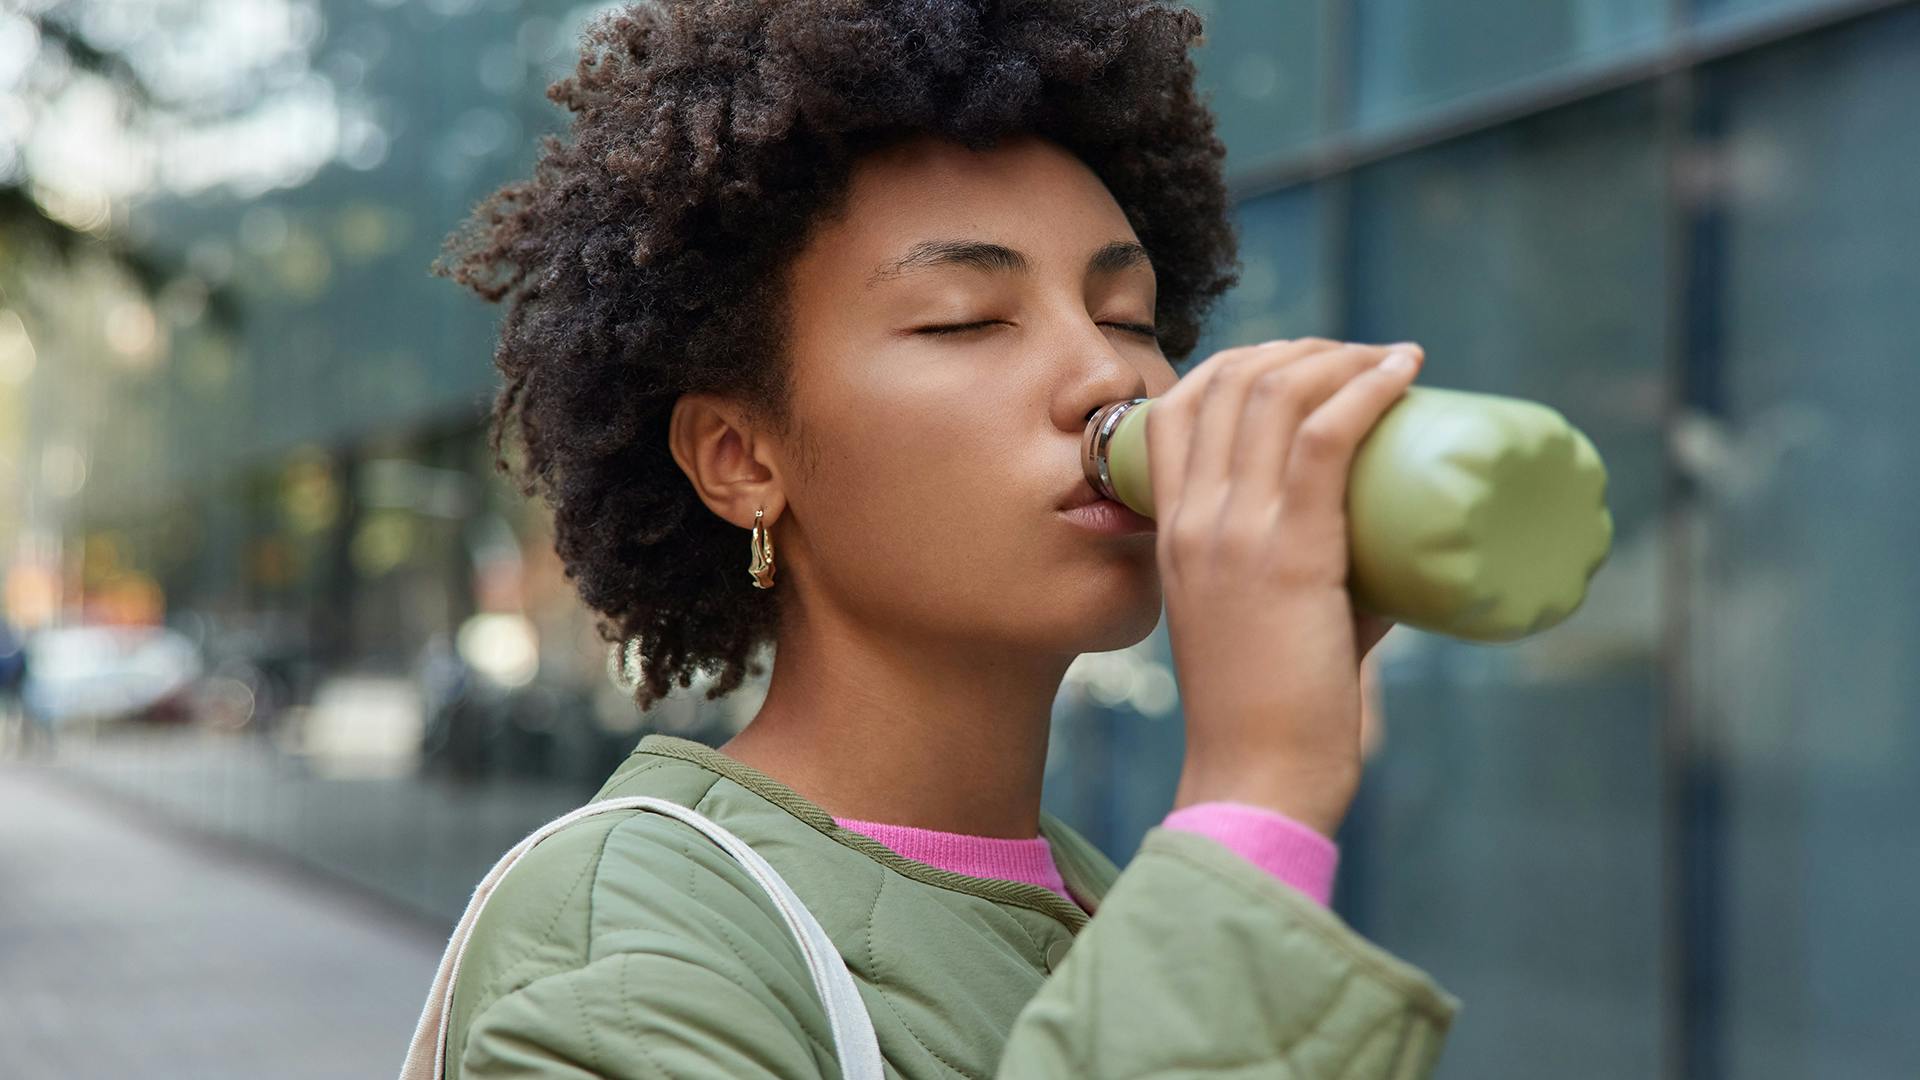 Tired thirsty woman with Afro hair drinks water from bottle takes break while walking in city poses in urban setting keeps eyes closed wears jacket hydrates herself. People lifestyle wellbeing concept